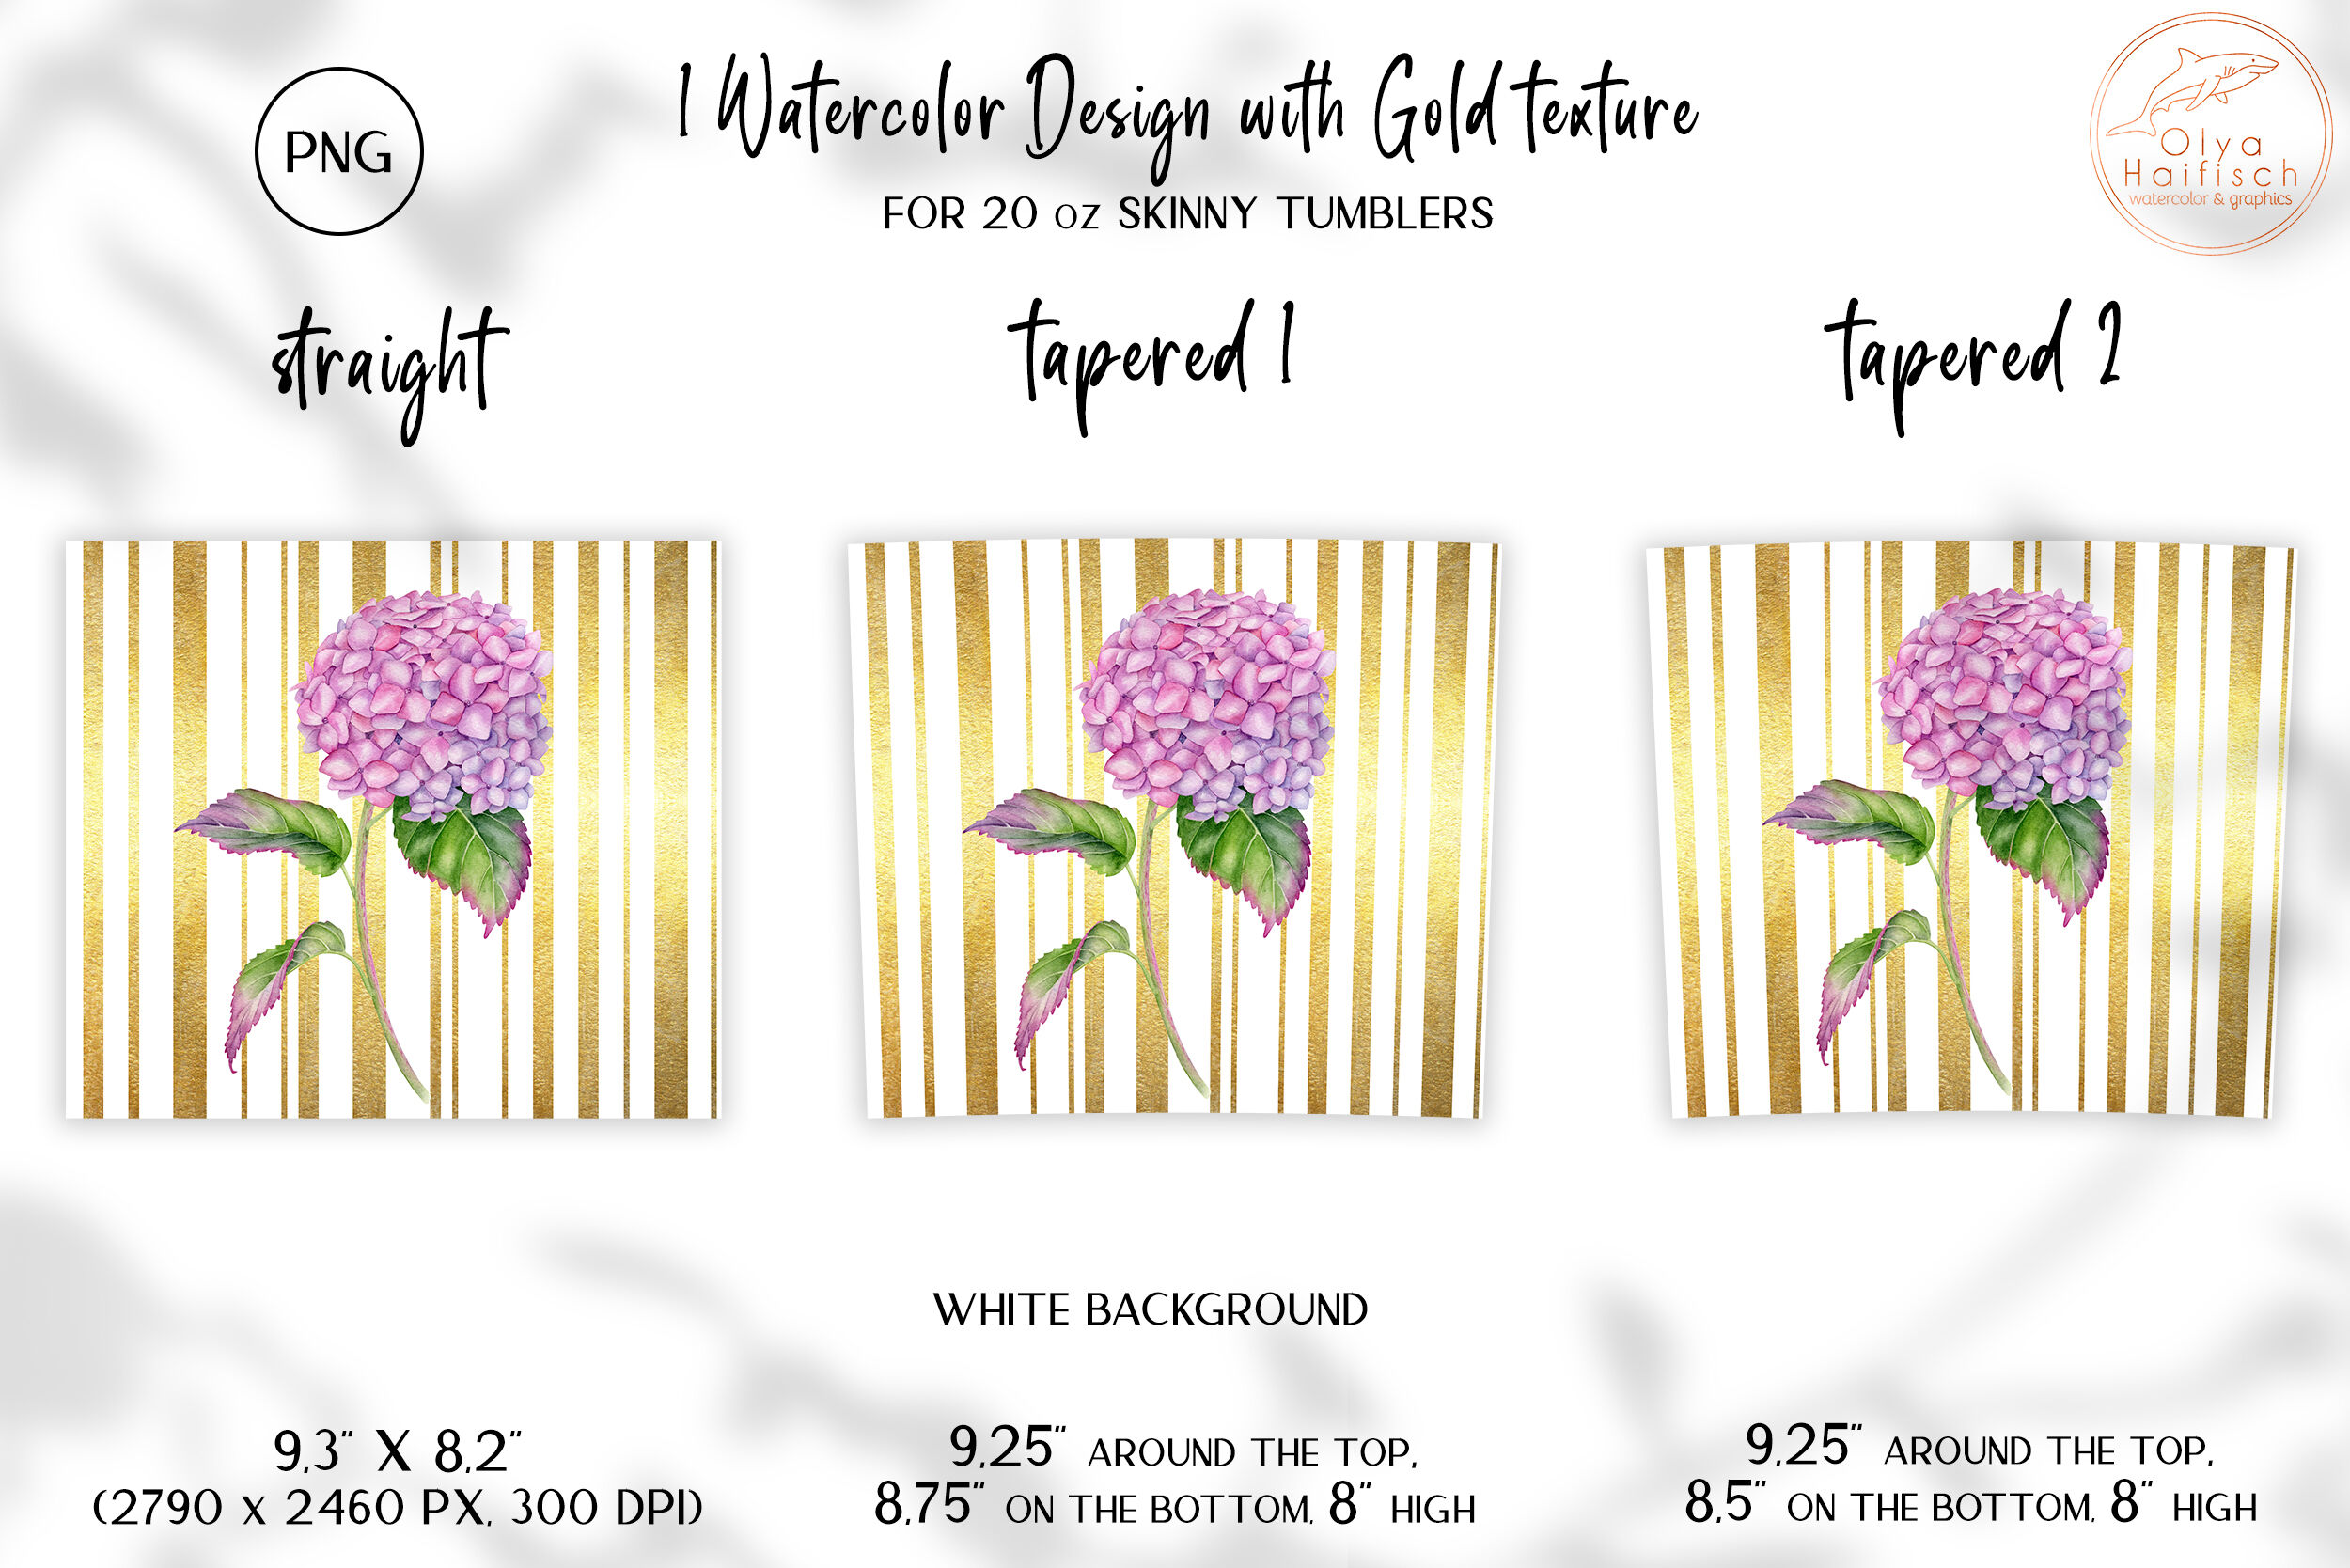 Watercolor Candy Tumbler Sublimation. Cute Pink Skinny Tumbler Wrap By Olya  Haifisch